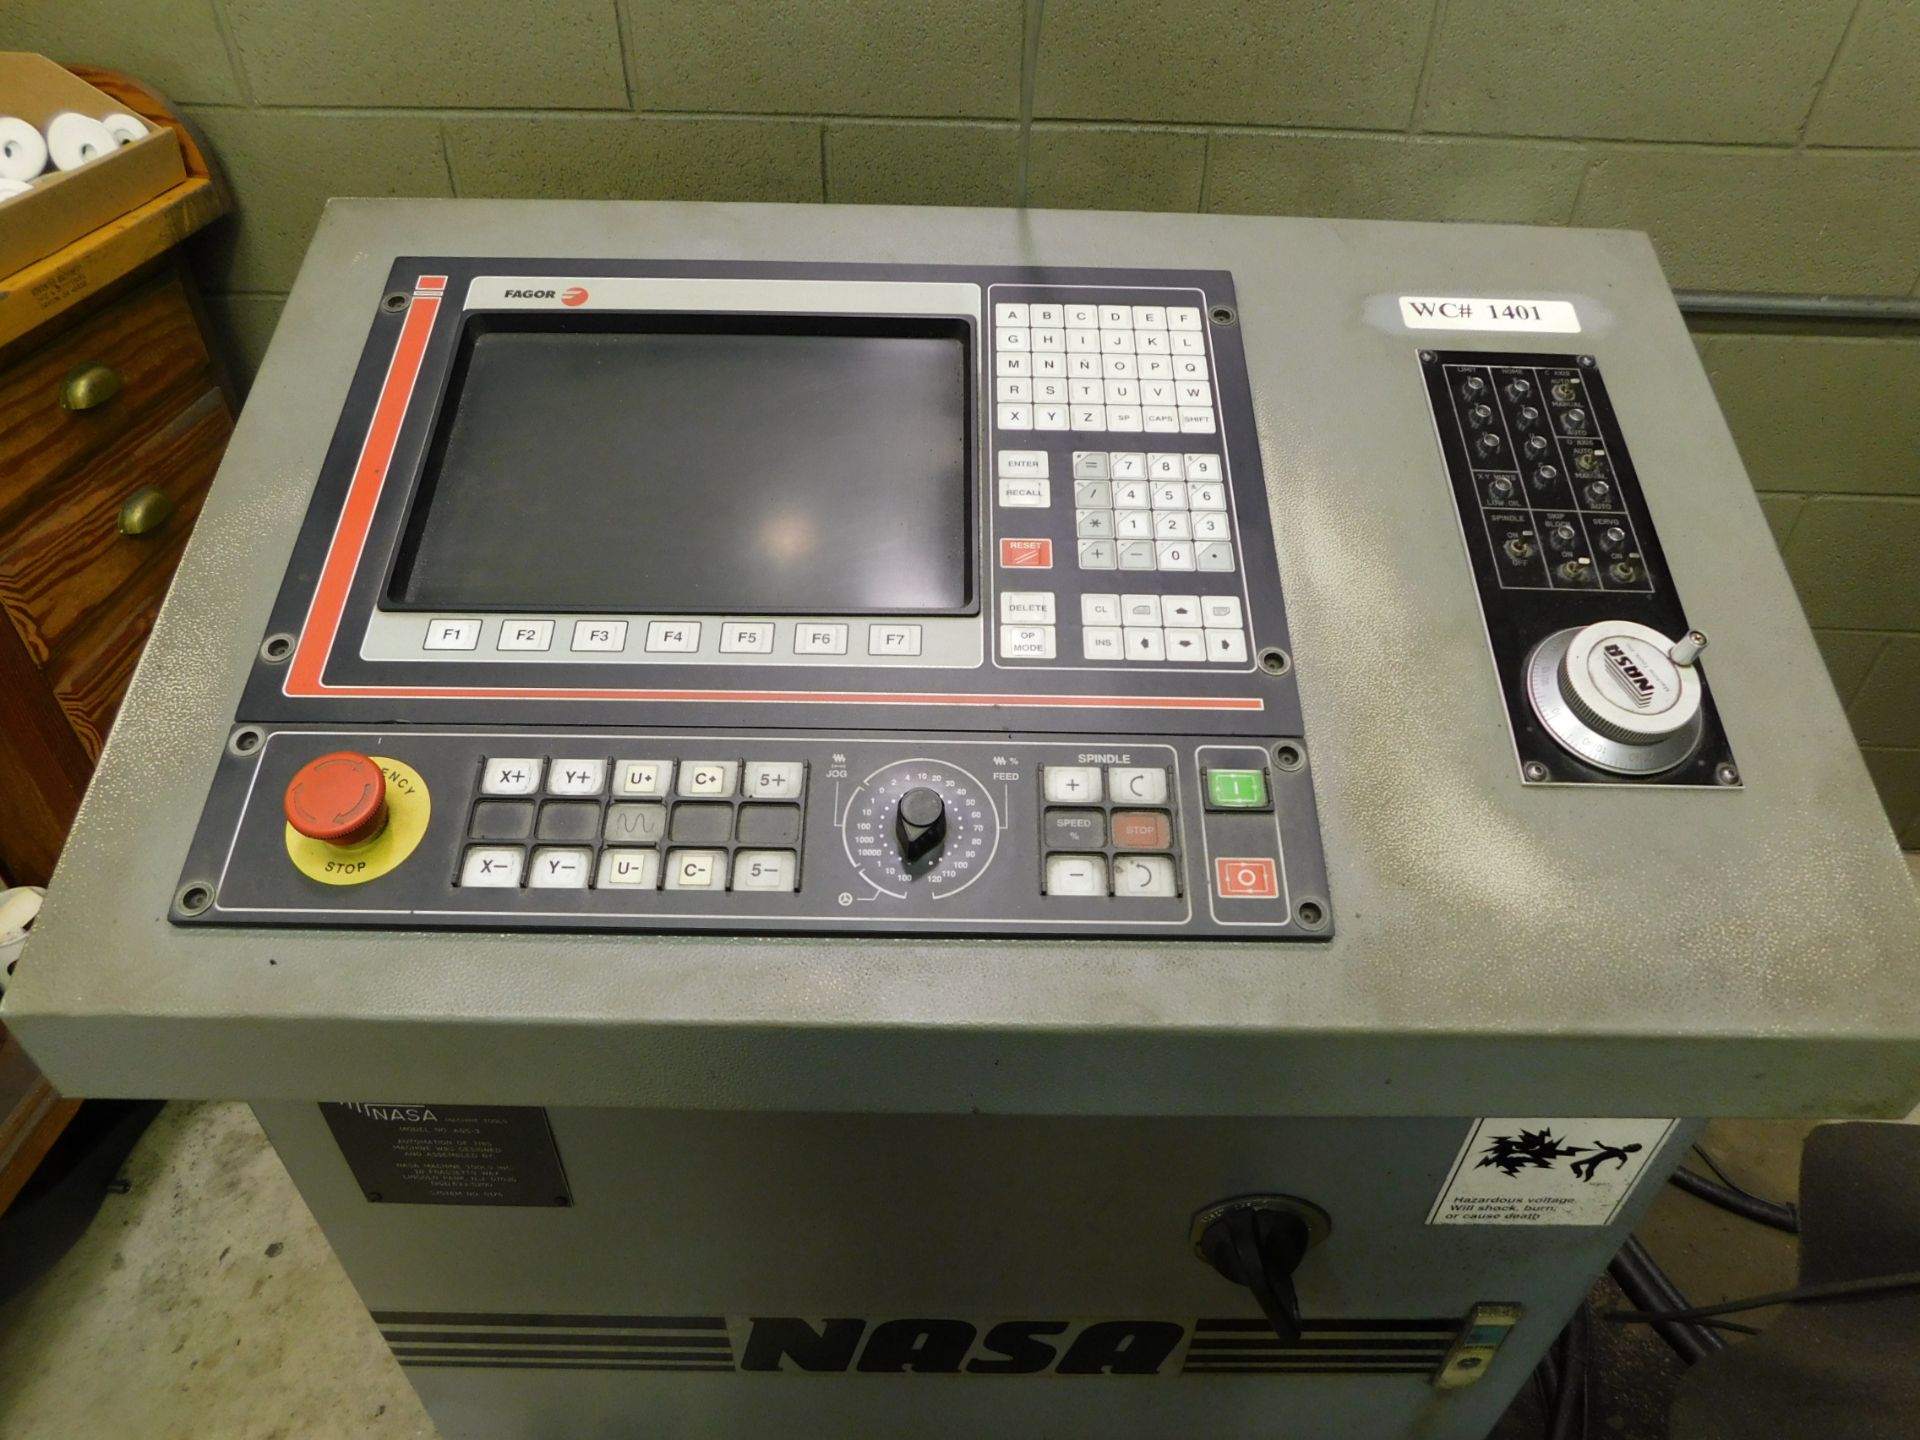 Moore Model #3 CNC Jig Grinder snG163w/NASA/Fagor Model AGS-3 CNC Control (NOT IN SERVICE) - Image 13 of 13